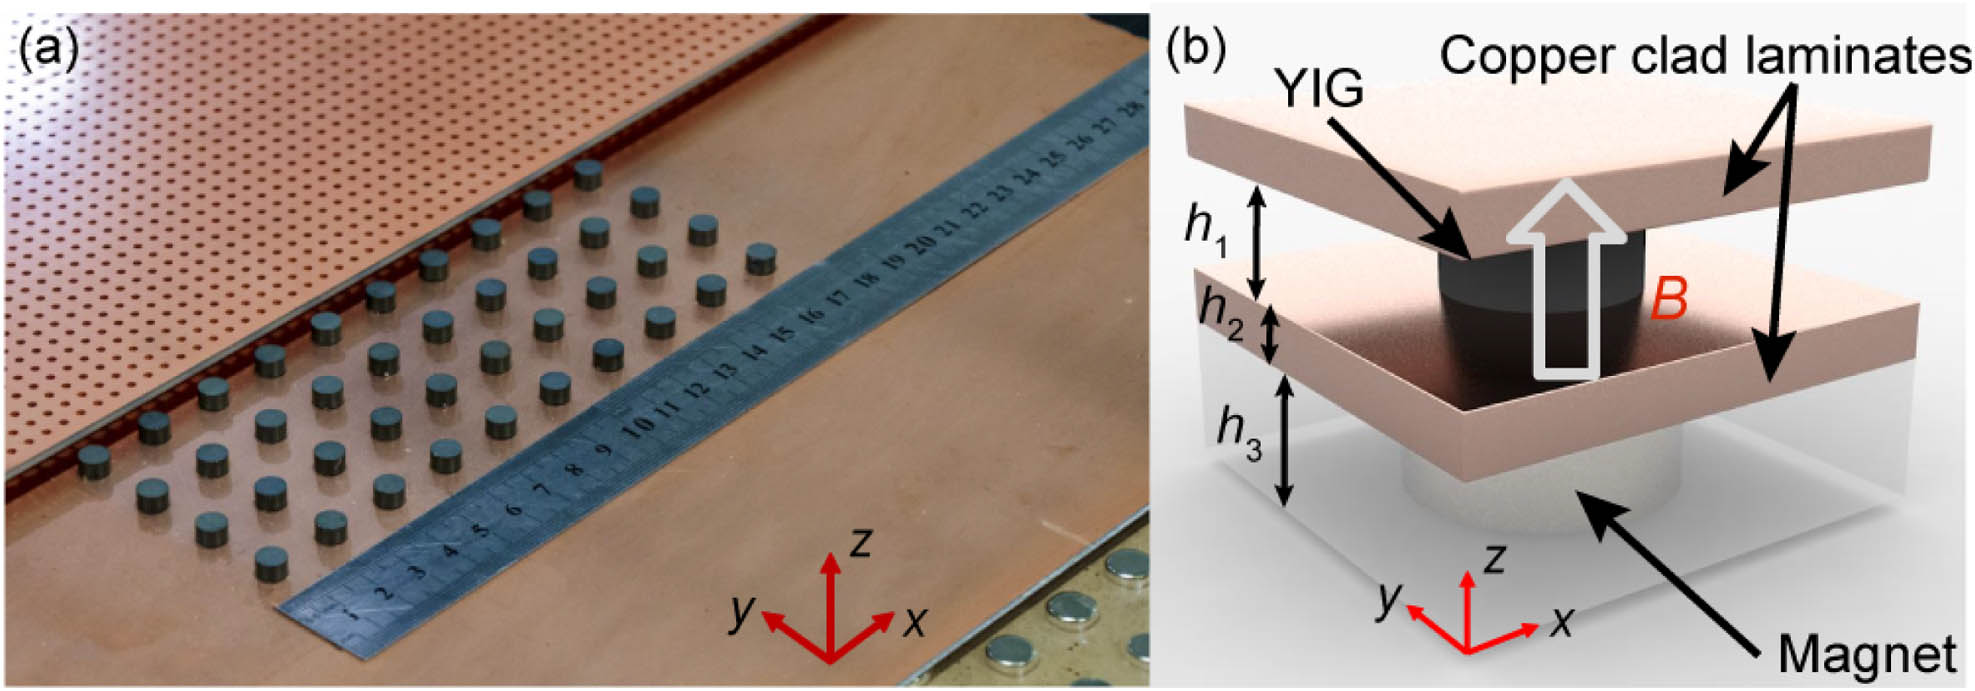 Schematic diagram of the active DCZIM structure. (a) The structure of an active DCZIM based on a gyromagnetic photonic crystal. (b) Schematic diagram of a unit cell. The YIG pillars were placed in a parallel-plate copper-clad waveguide with height h1=4 mm. The thickness of the waveguide plates was h2=2 mm. Permanent magnets with 5 mm diameter and height h3=5 mm were placed in an acrylic matrix underneath the waveguide and were aligned with the YIG pillars.